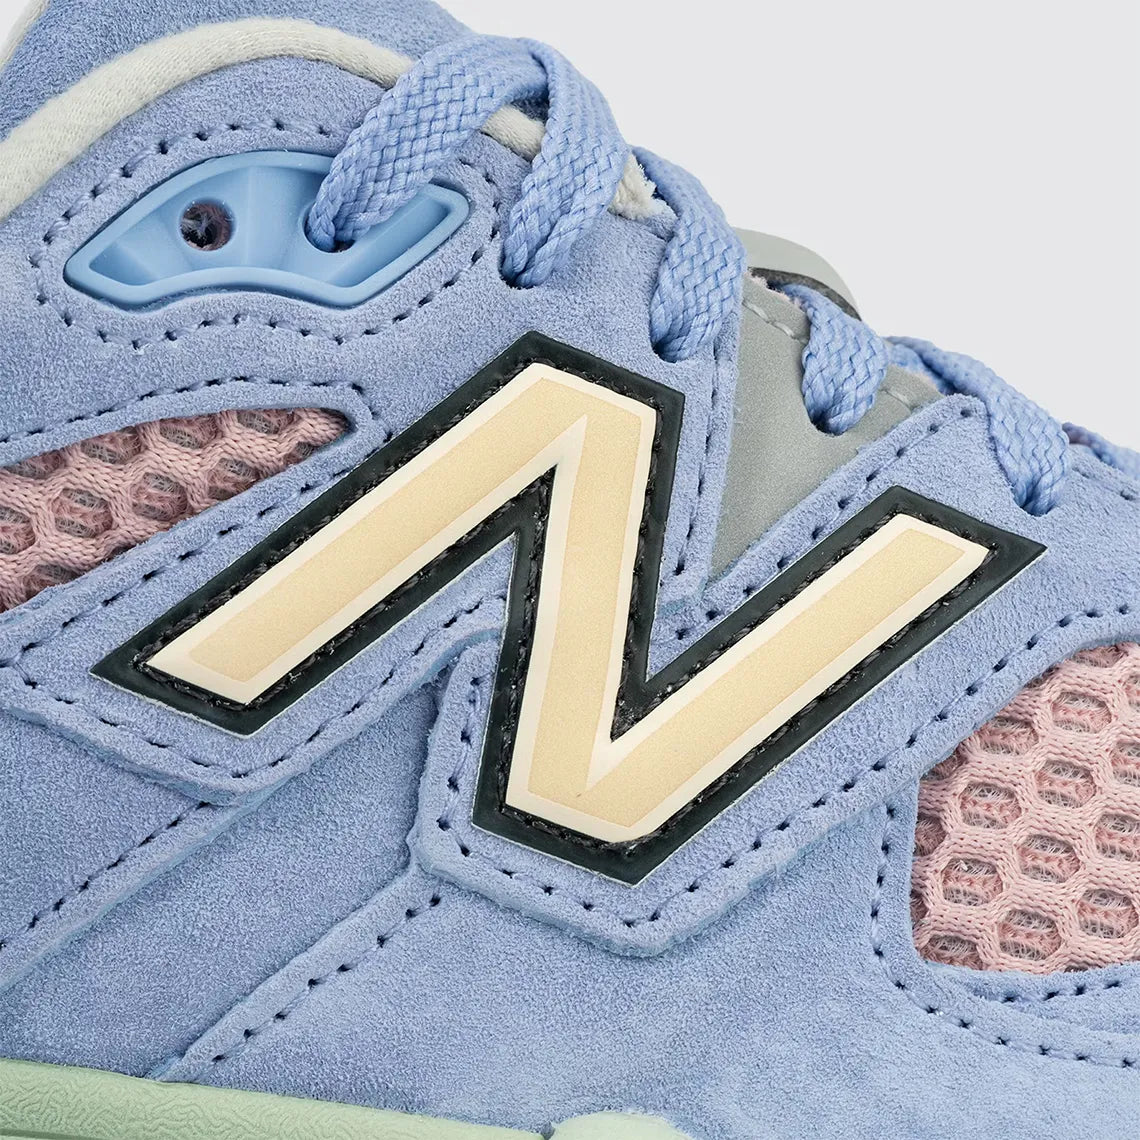 New Balance 9060 The Whitaker Group Missing Pieces Daydream Blue